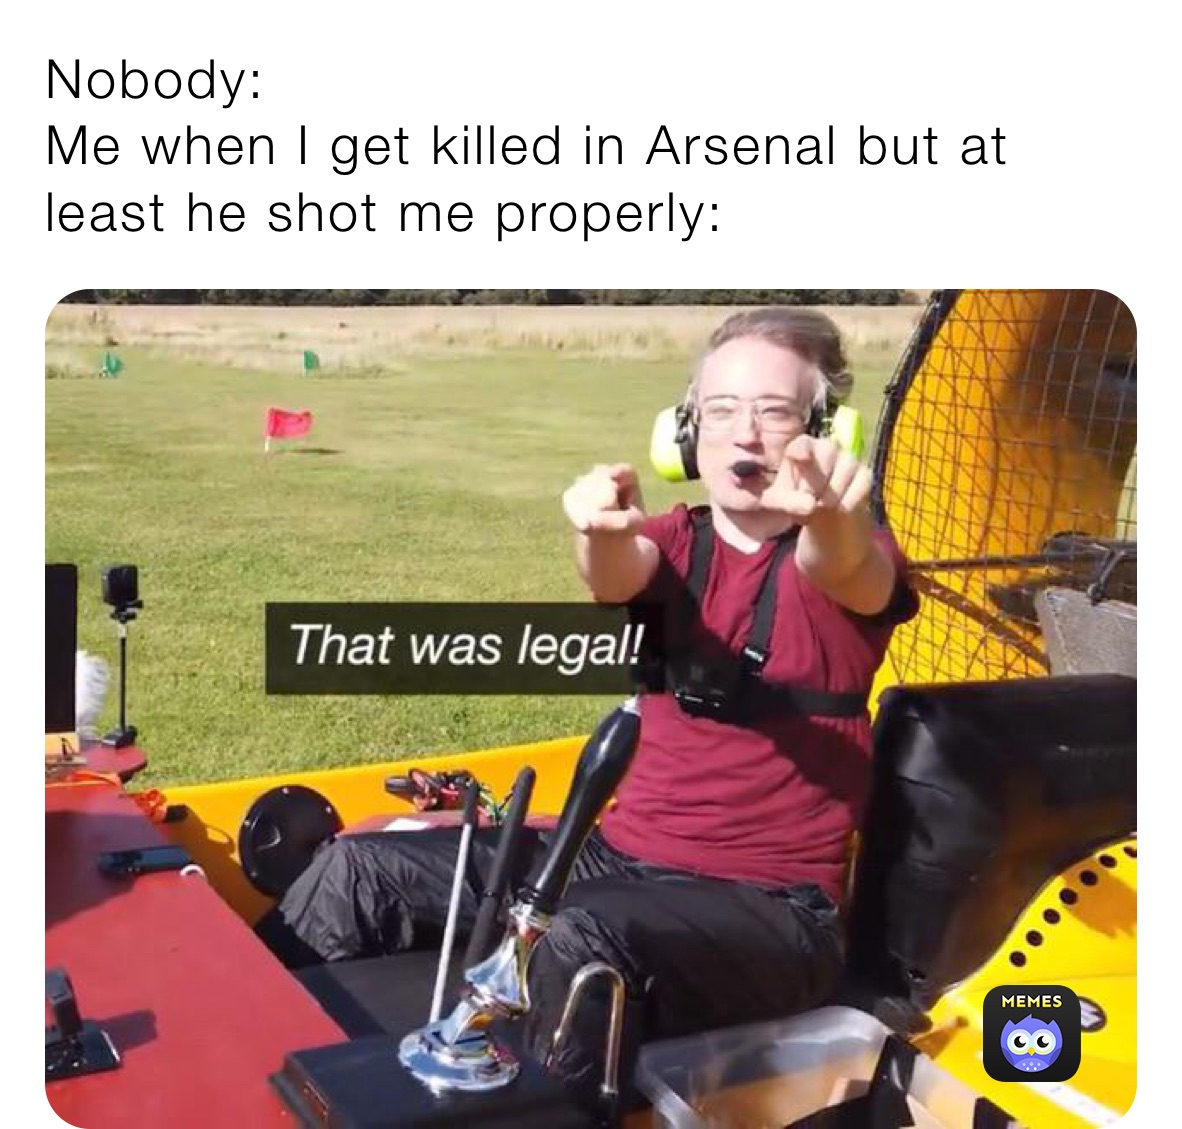 Nobody:
Me when I get killed in Arsenal but at least he shot me properly: